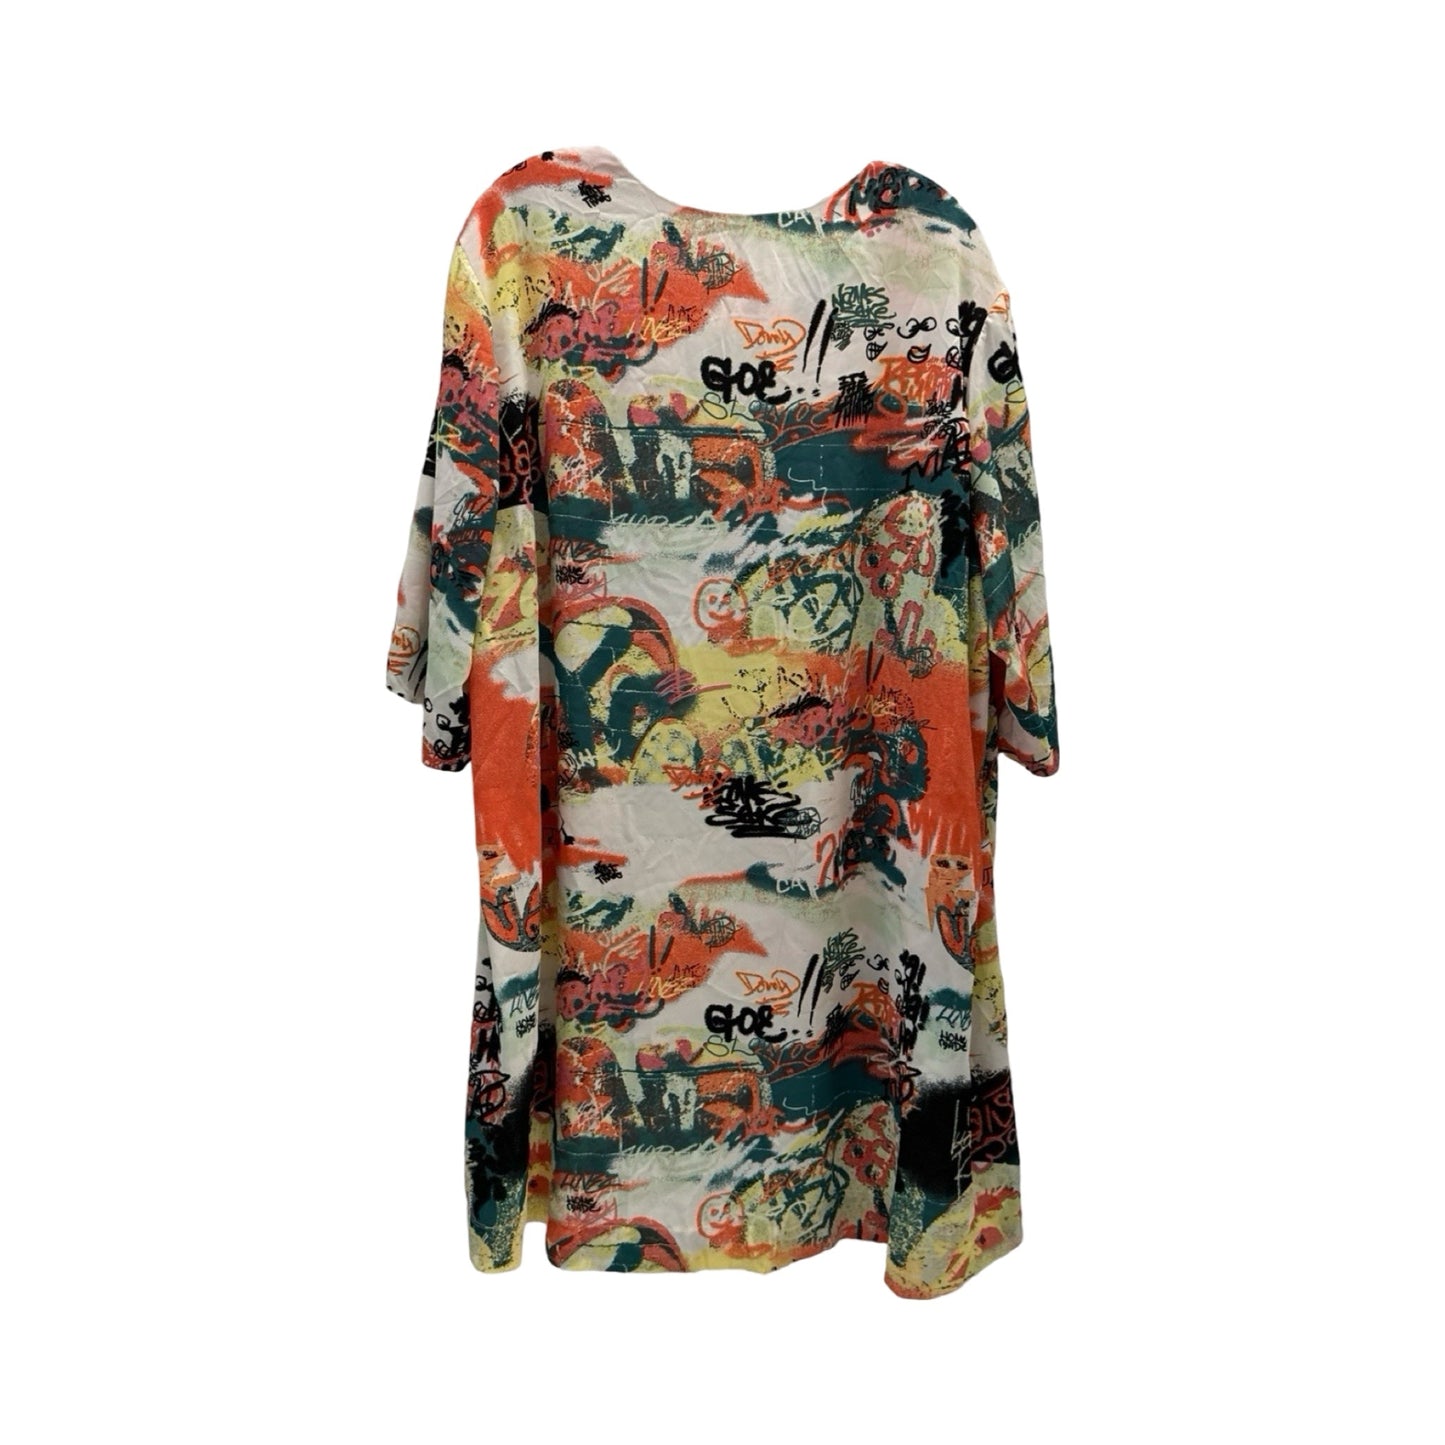 Multi-colored Blouse Short Sleeve Melissa Mccarthy, Size 3x